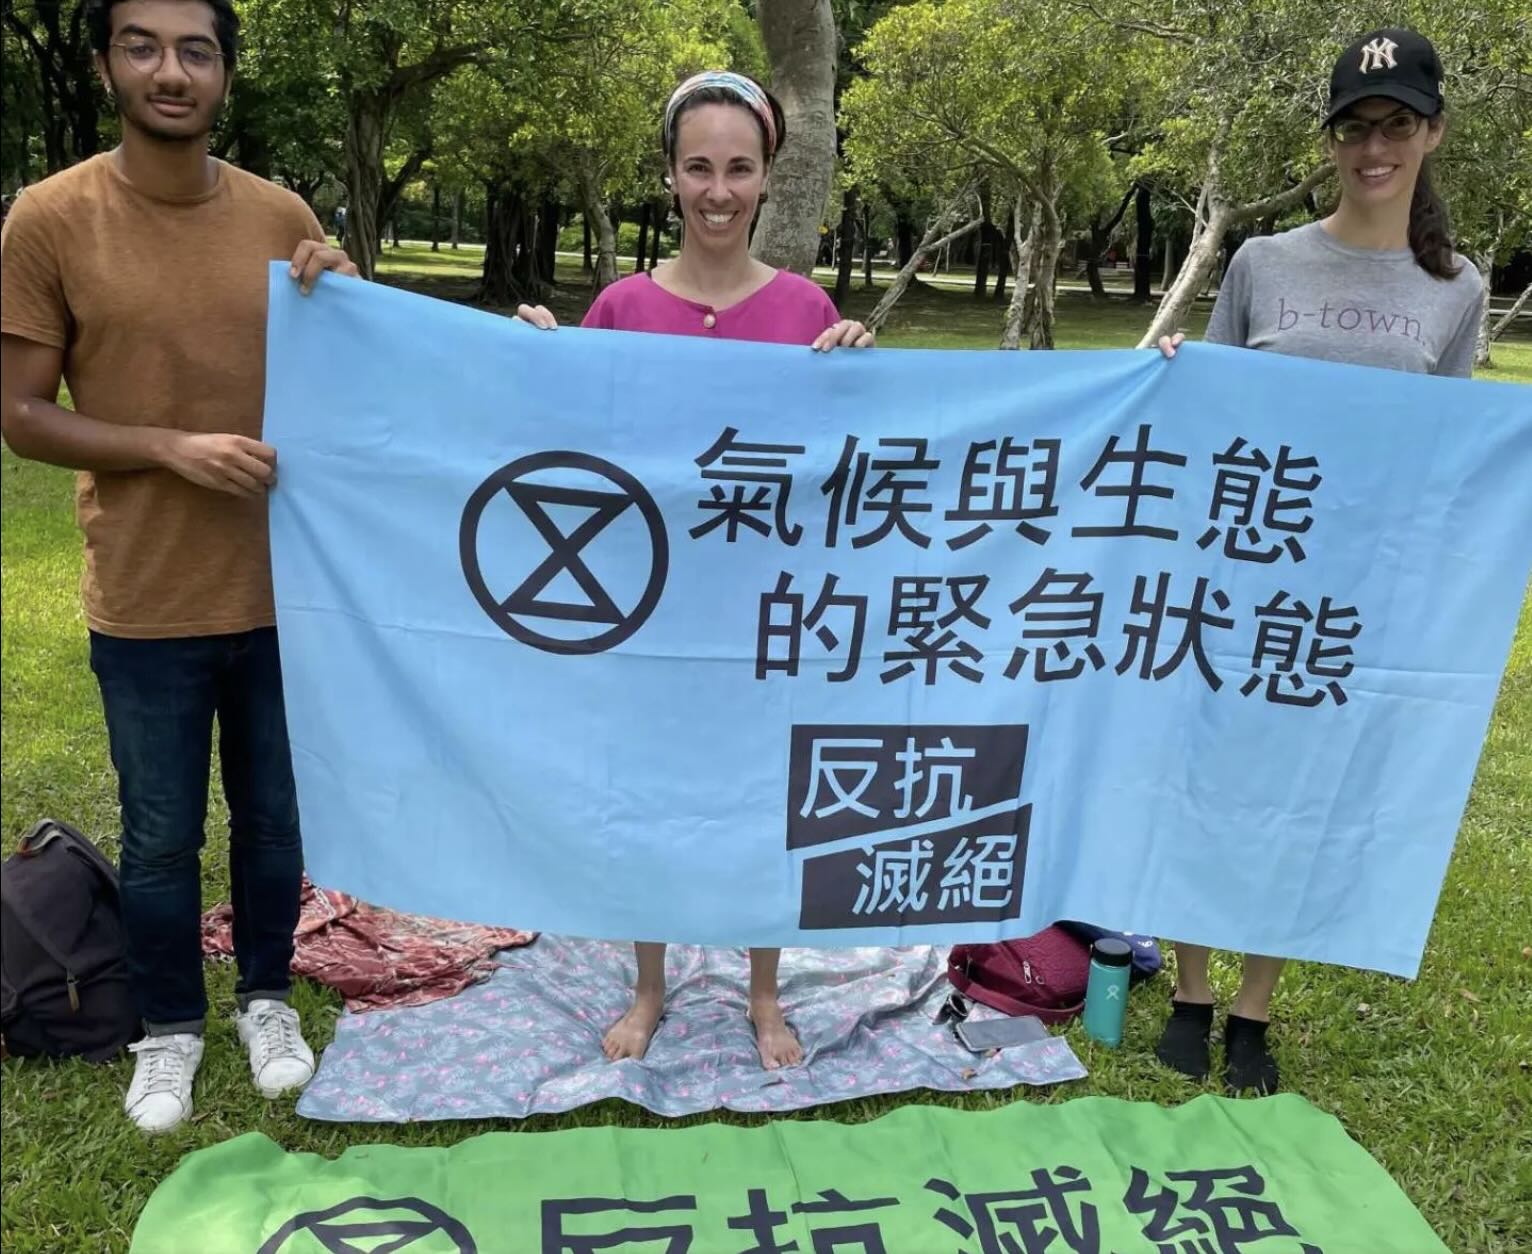 Jen and two other rebels hold up a banner in a public park having done group meditation